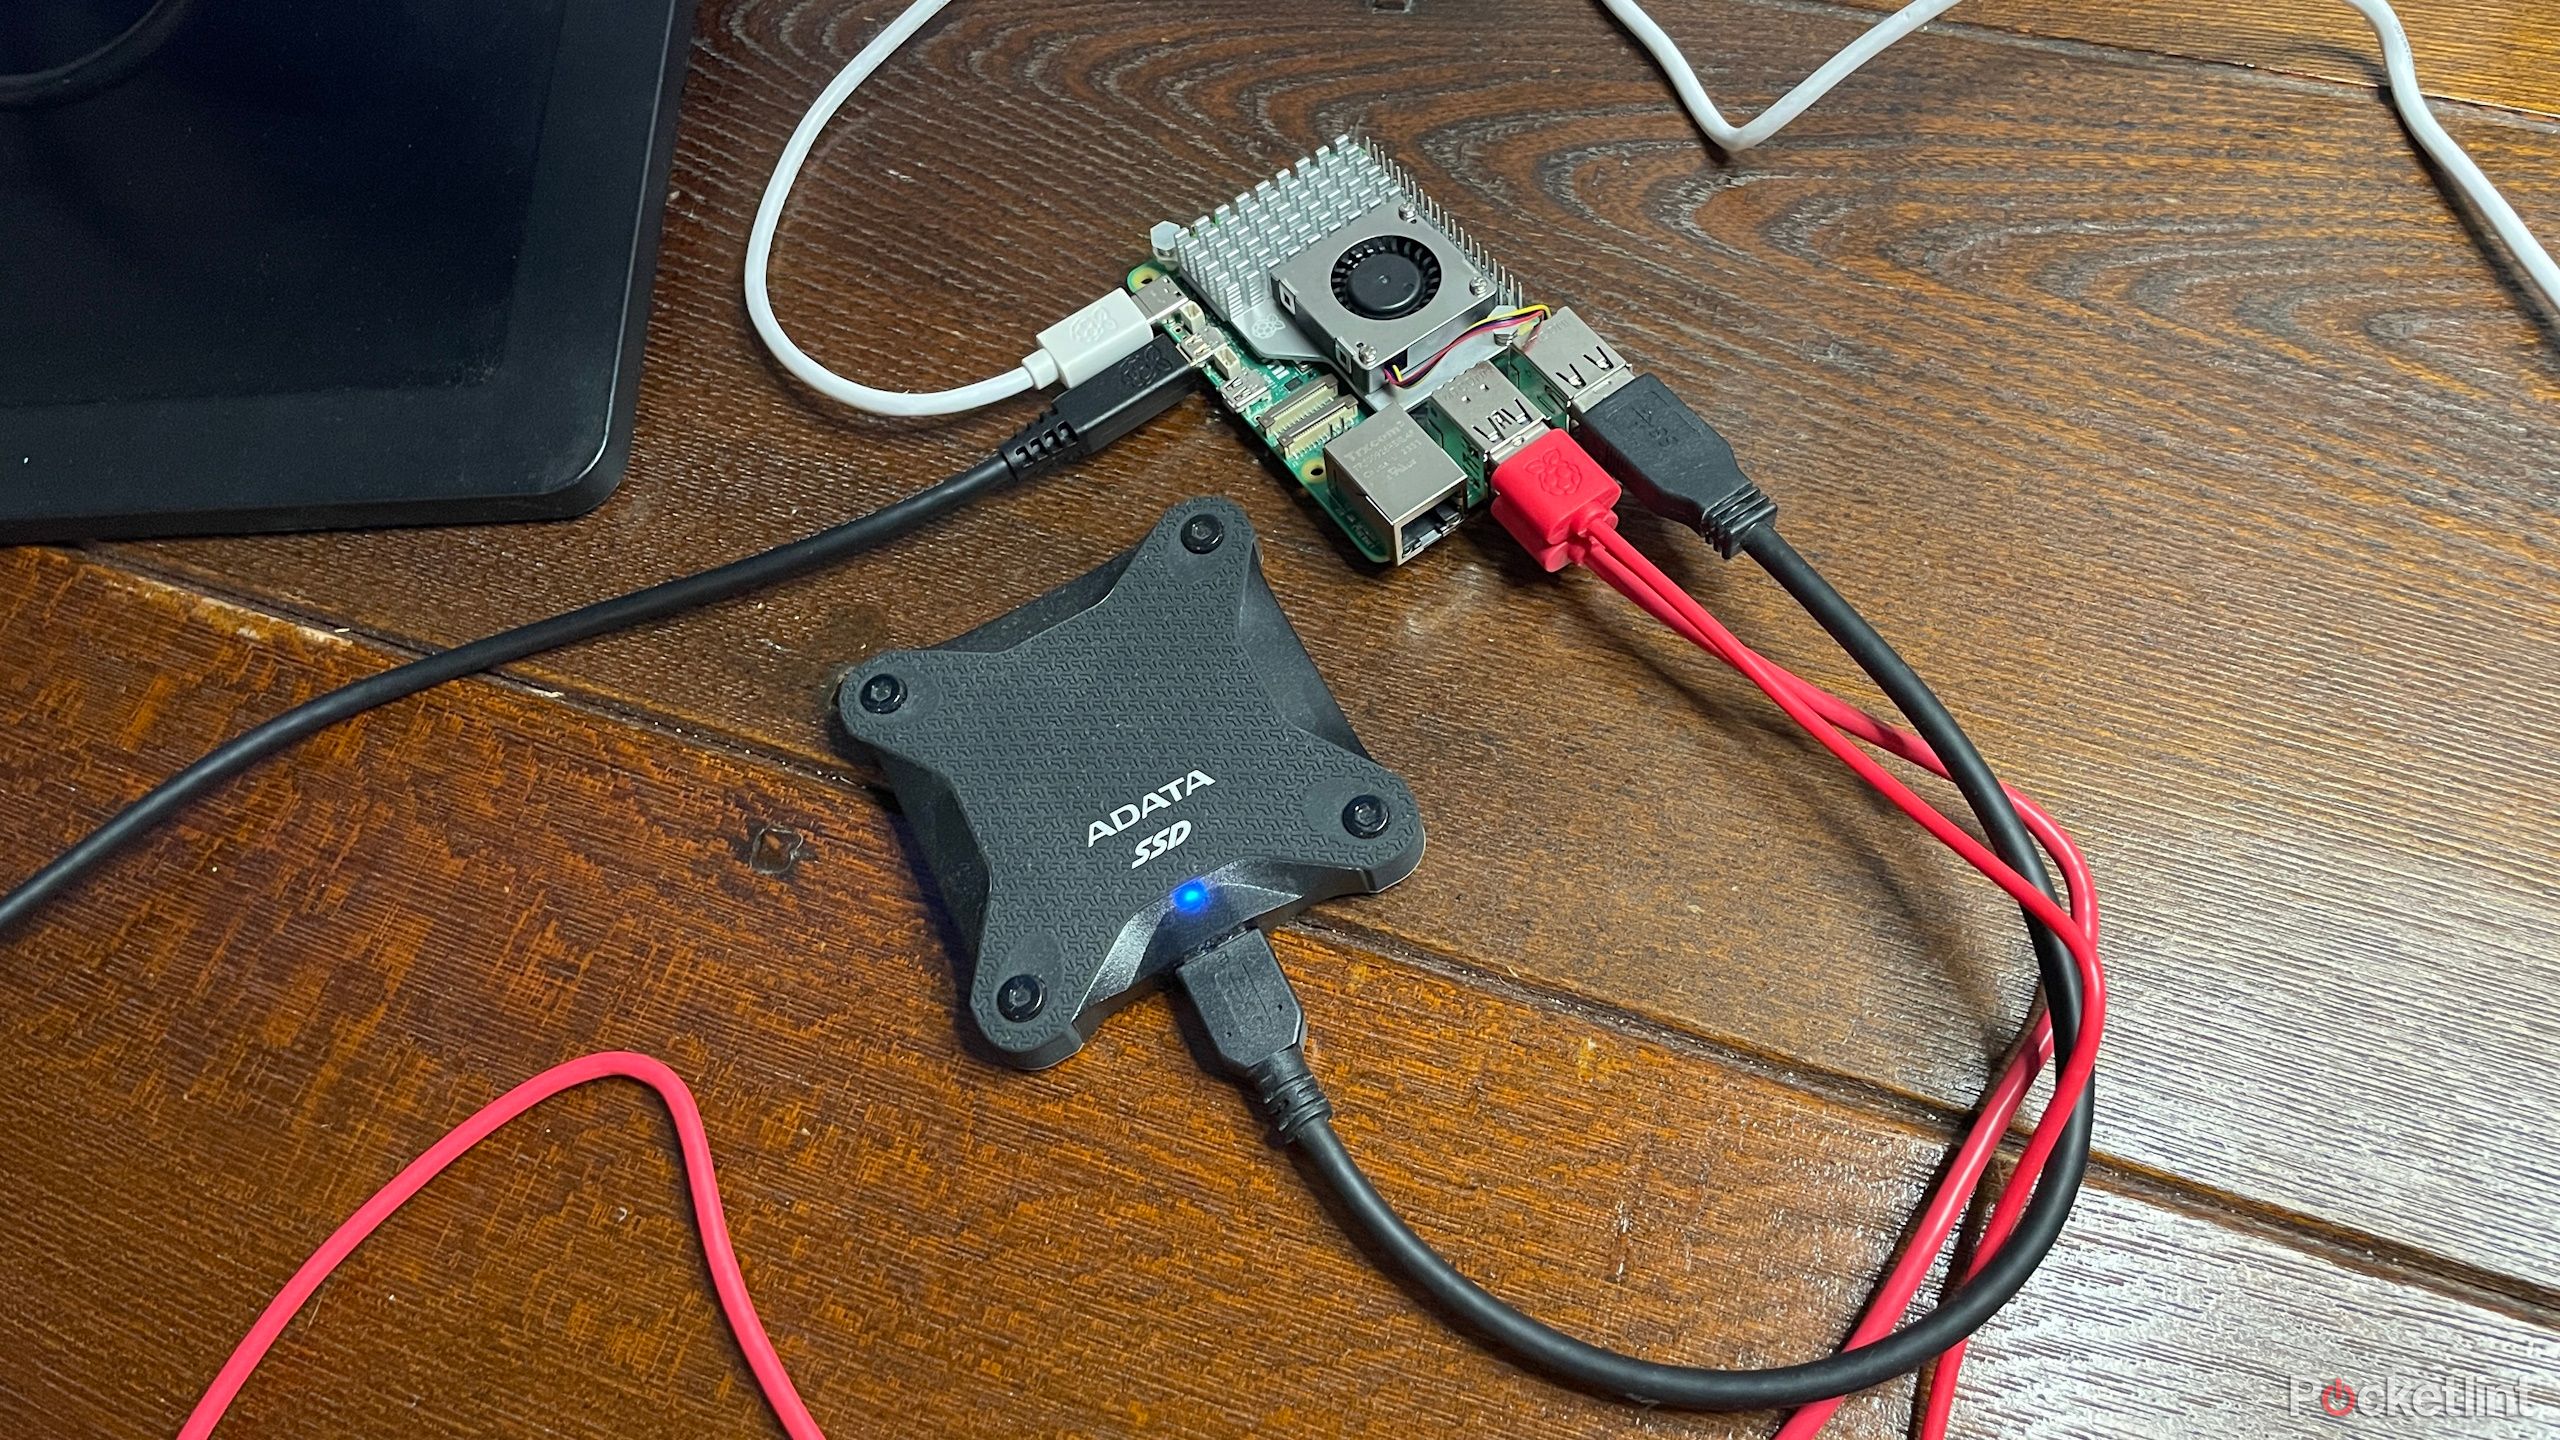 Raspberry Pi 5 connected to an ADATA external USB SSD